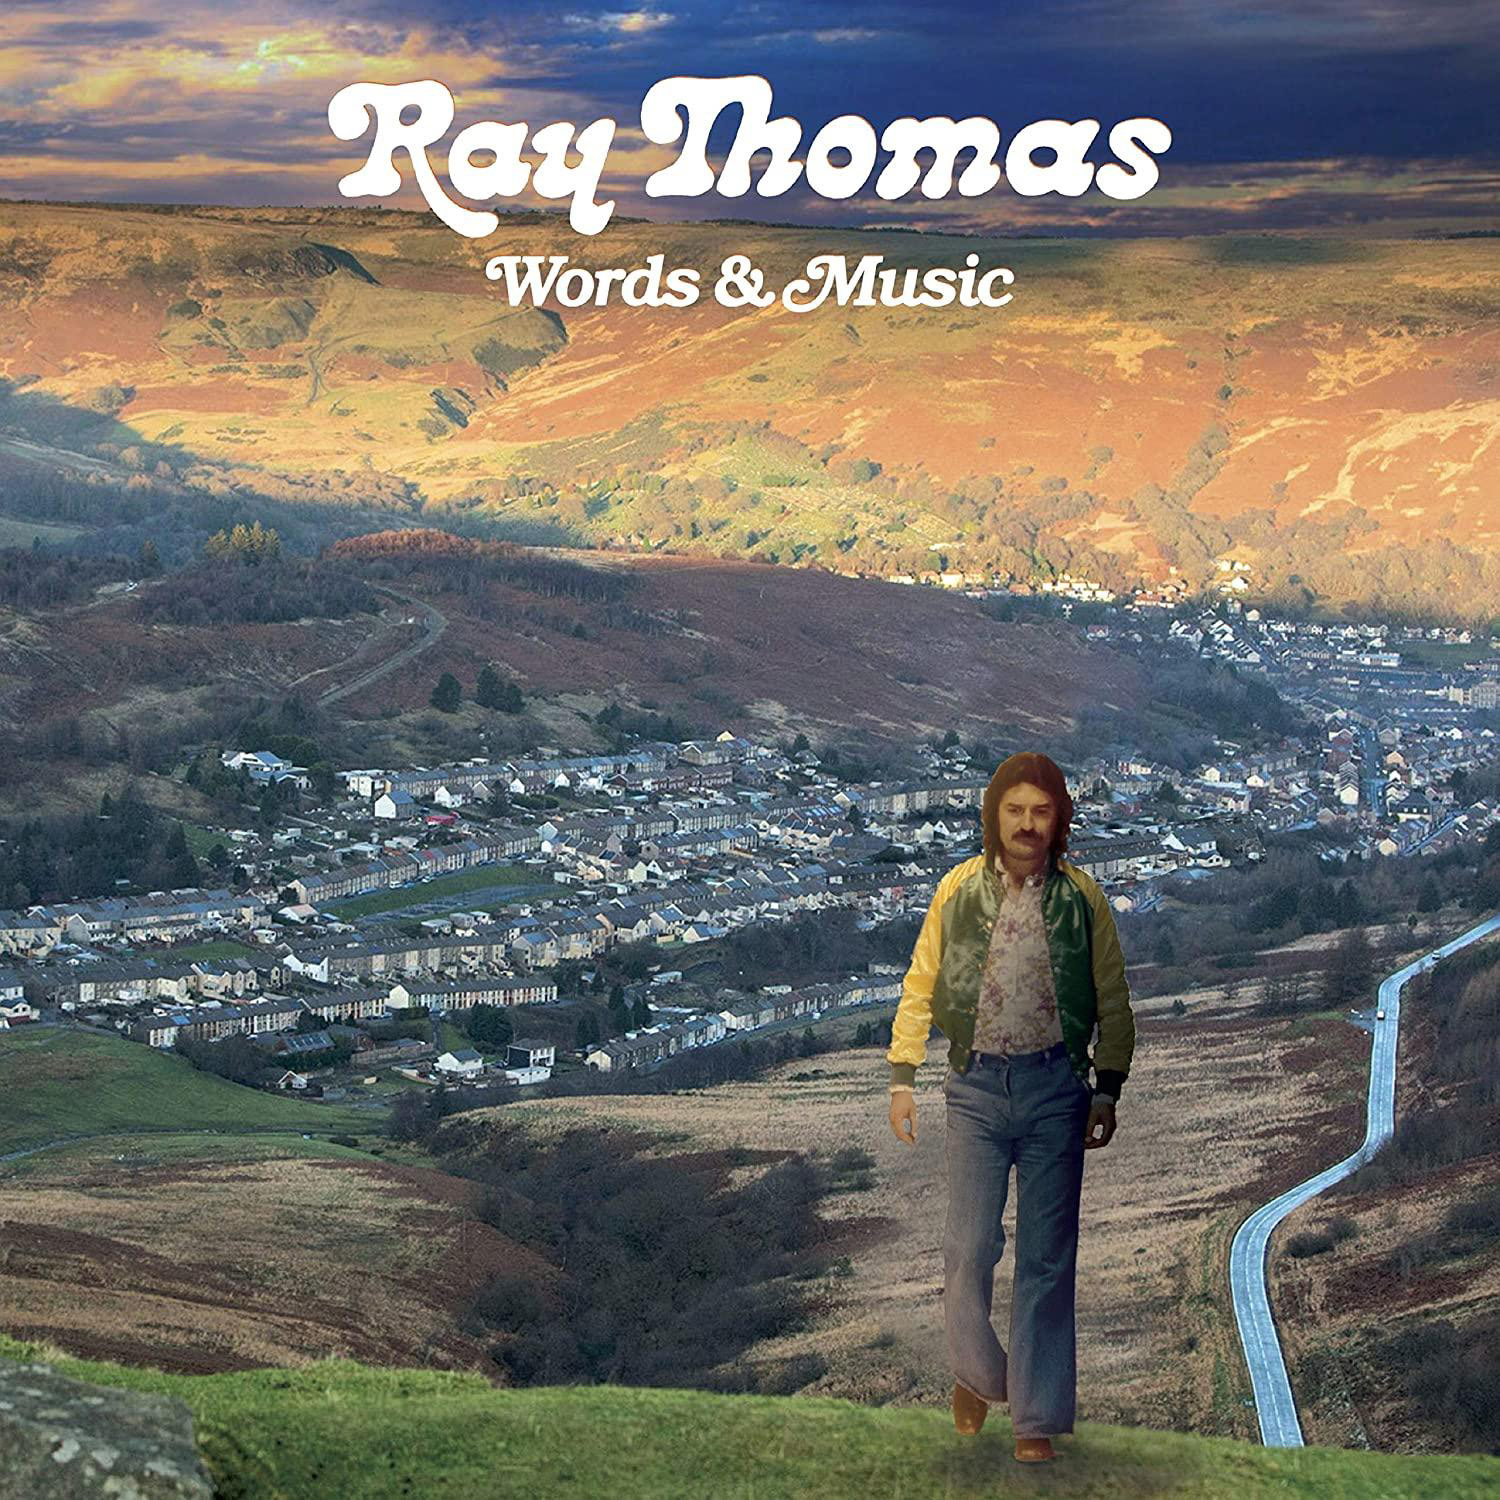 Thomas Newly Words + (CD/DVD) Disc - 2 - Co And Ray Music: (CD Video) Remastered DVD